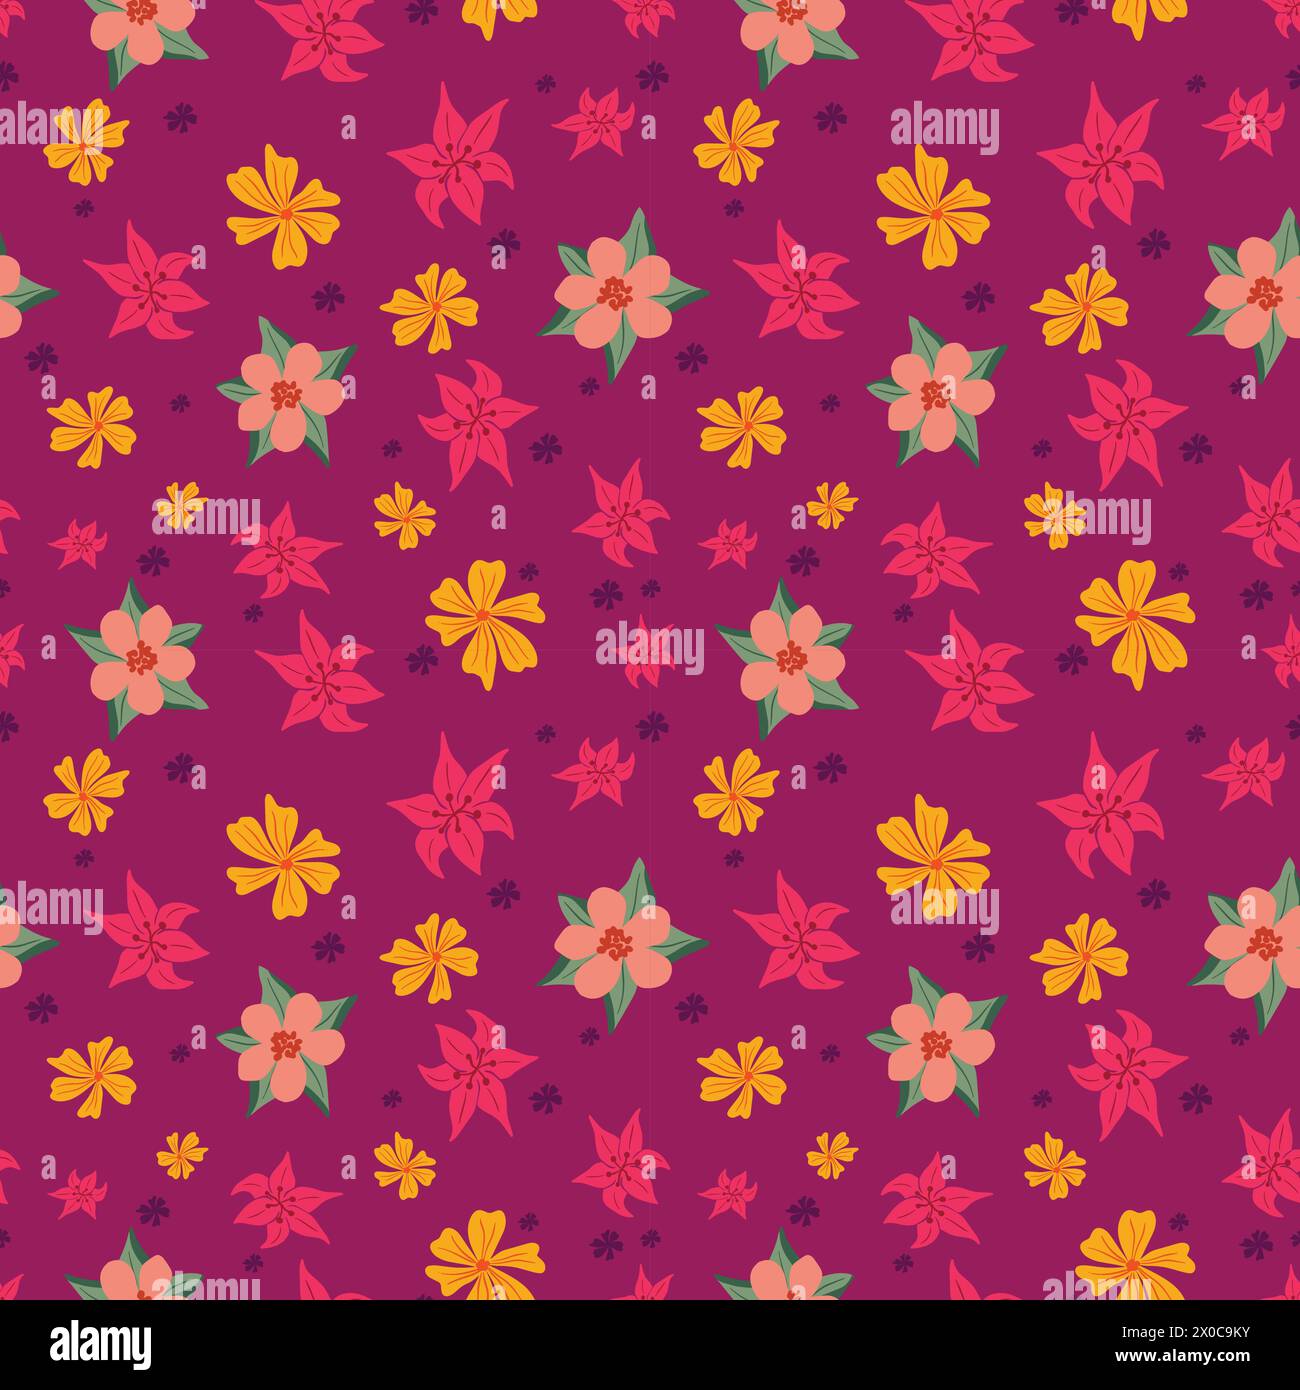 Spring floral seamless pattern design Stock Vector